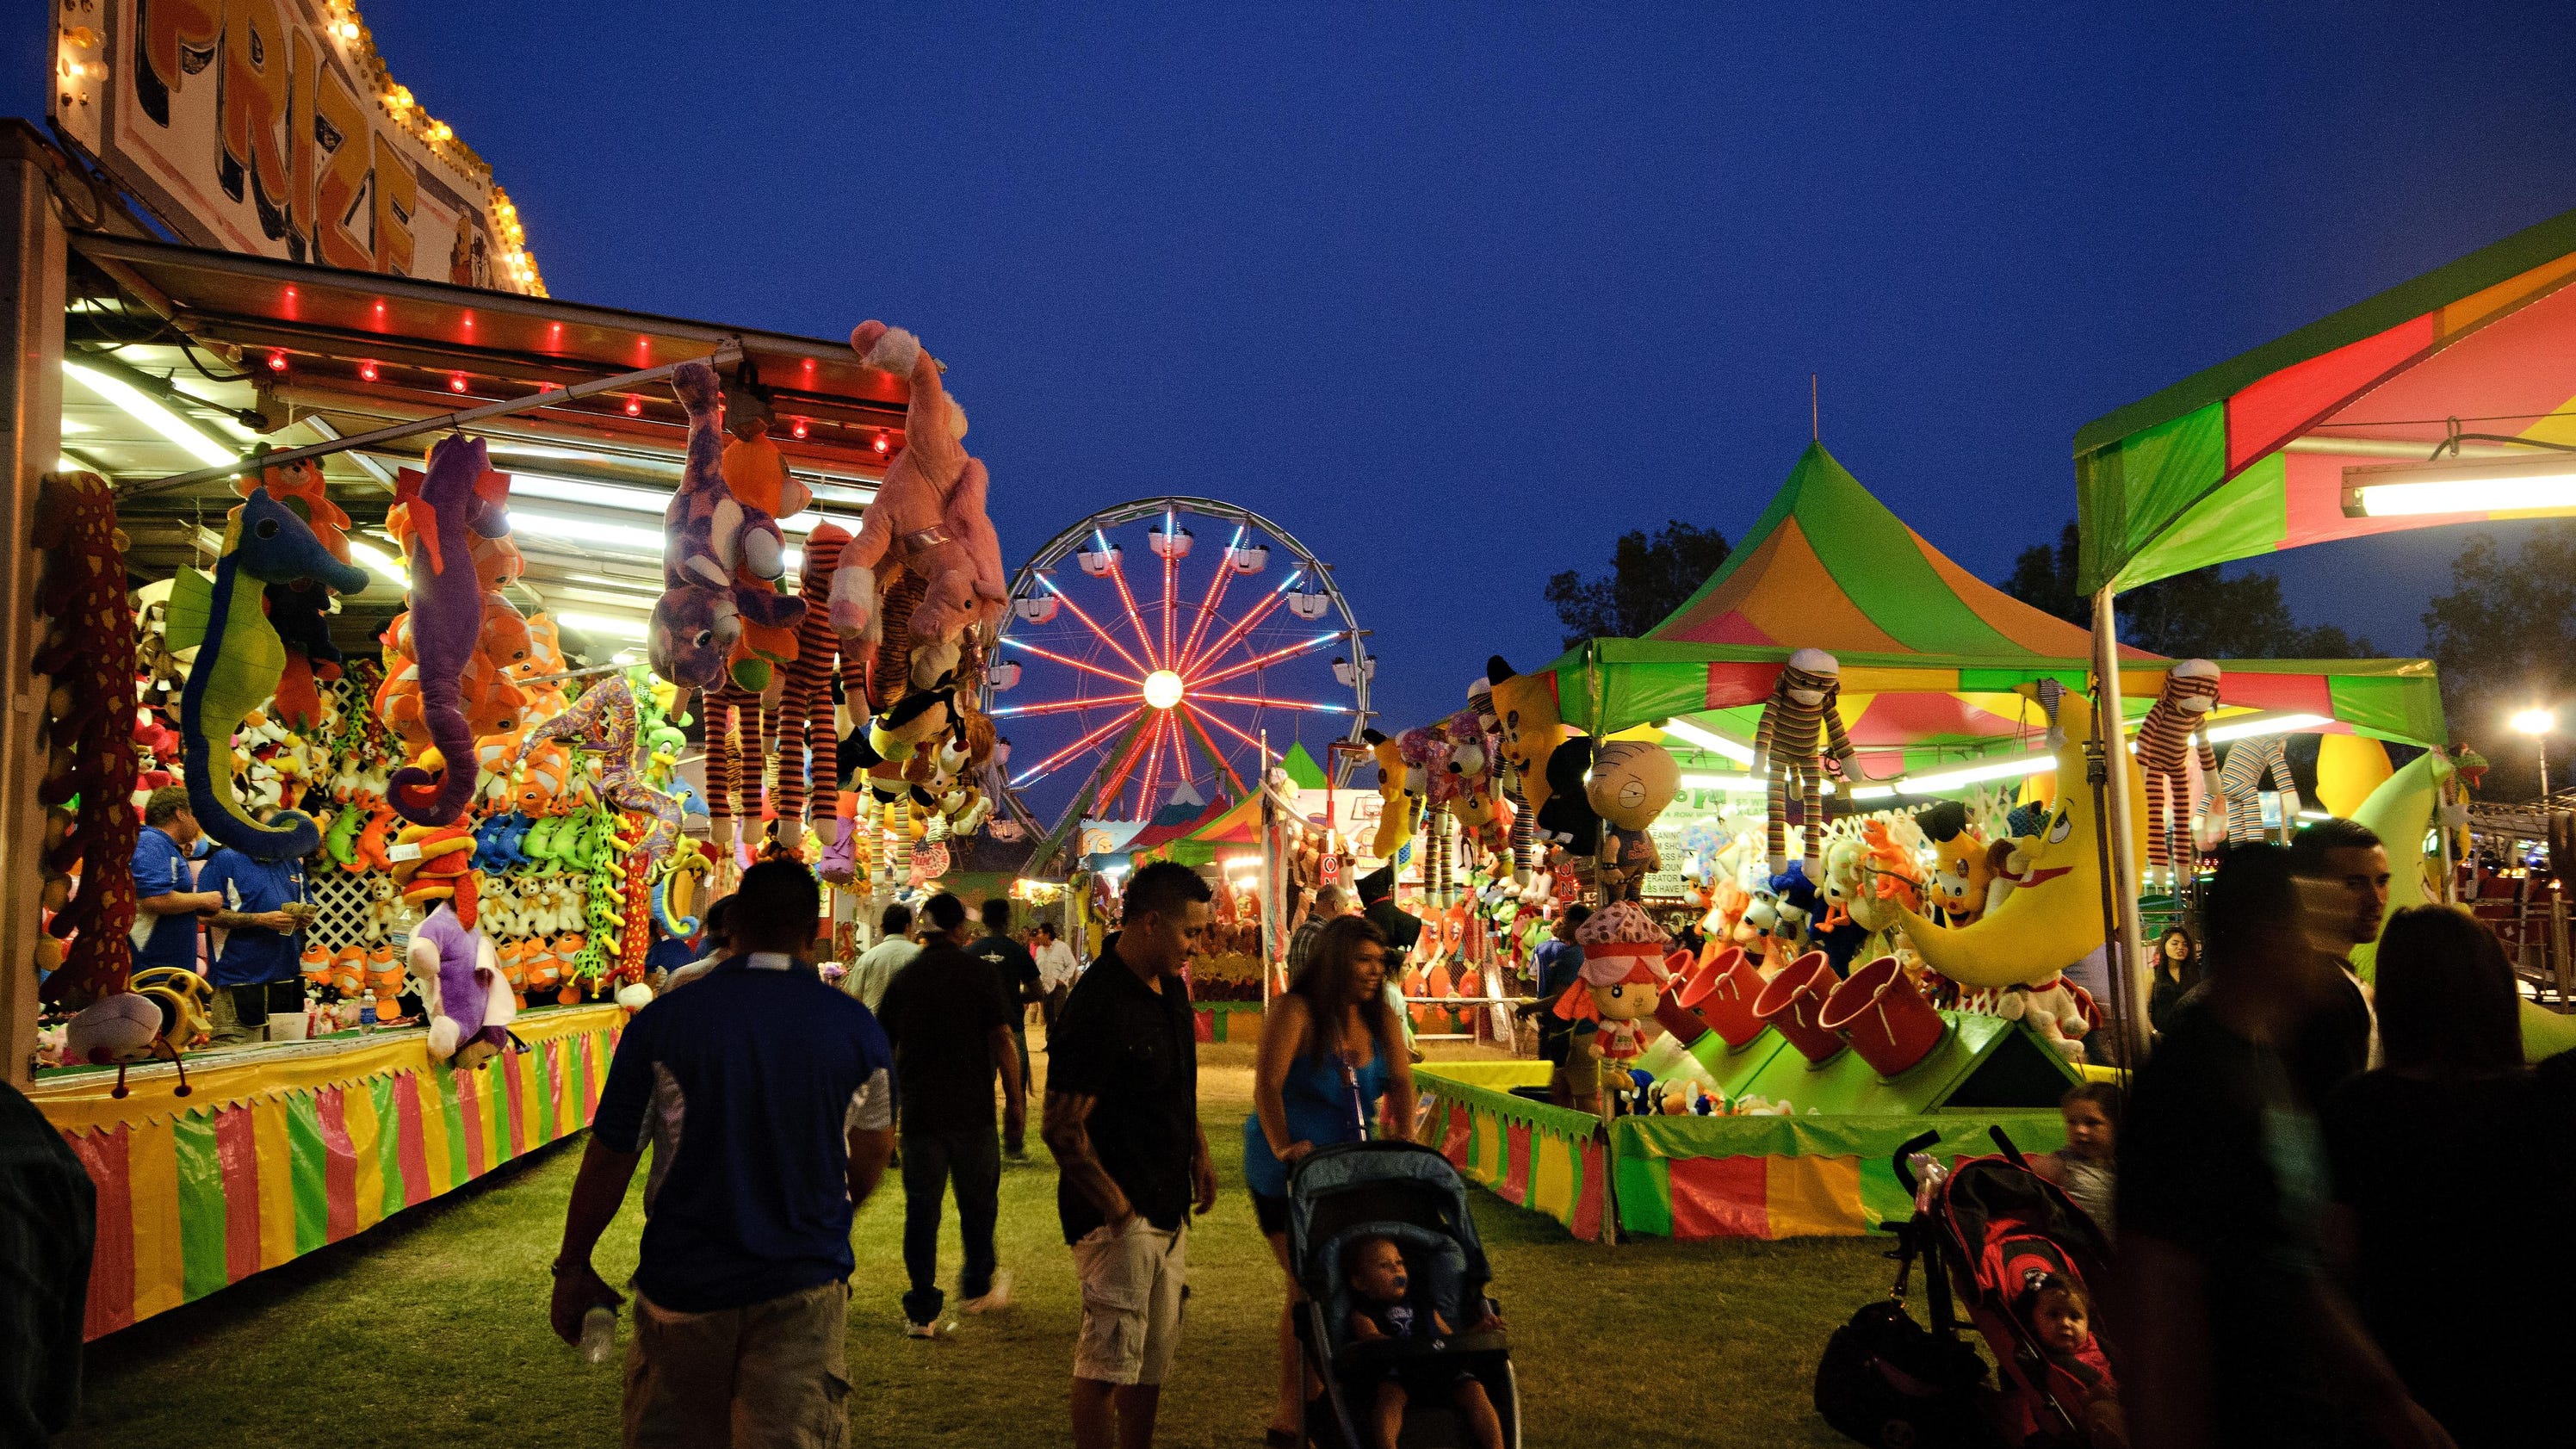 Organizations sought to sell carnival wristbands